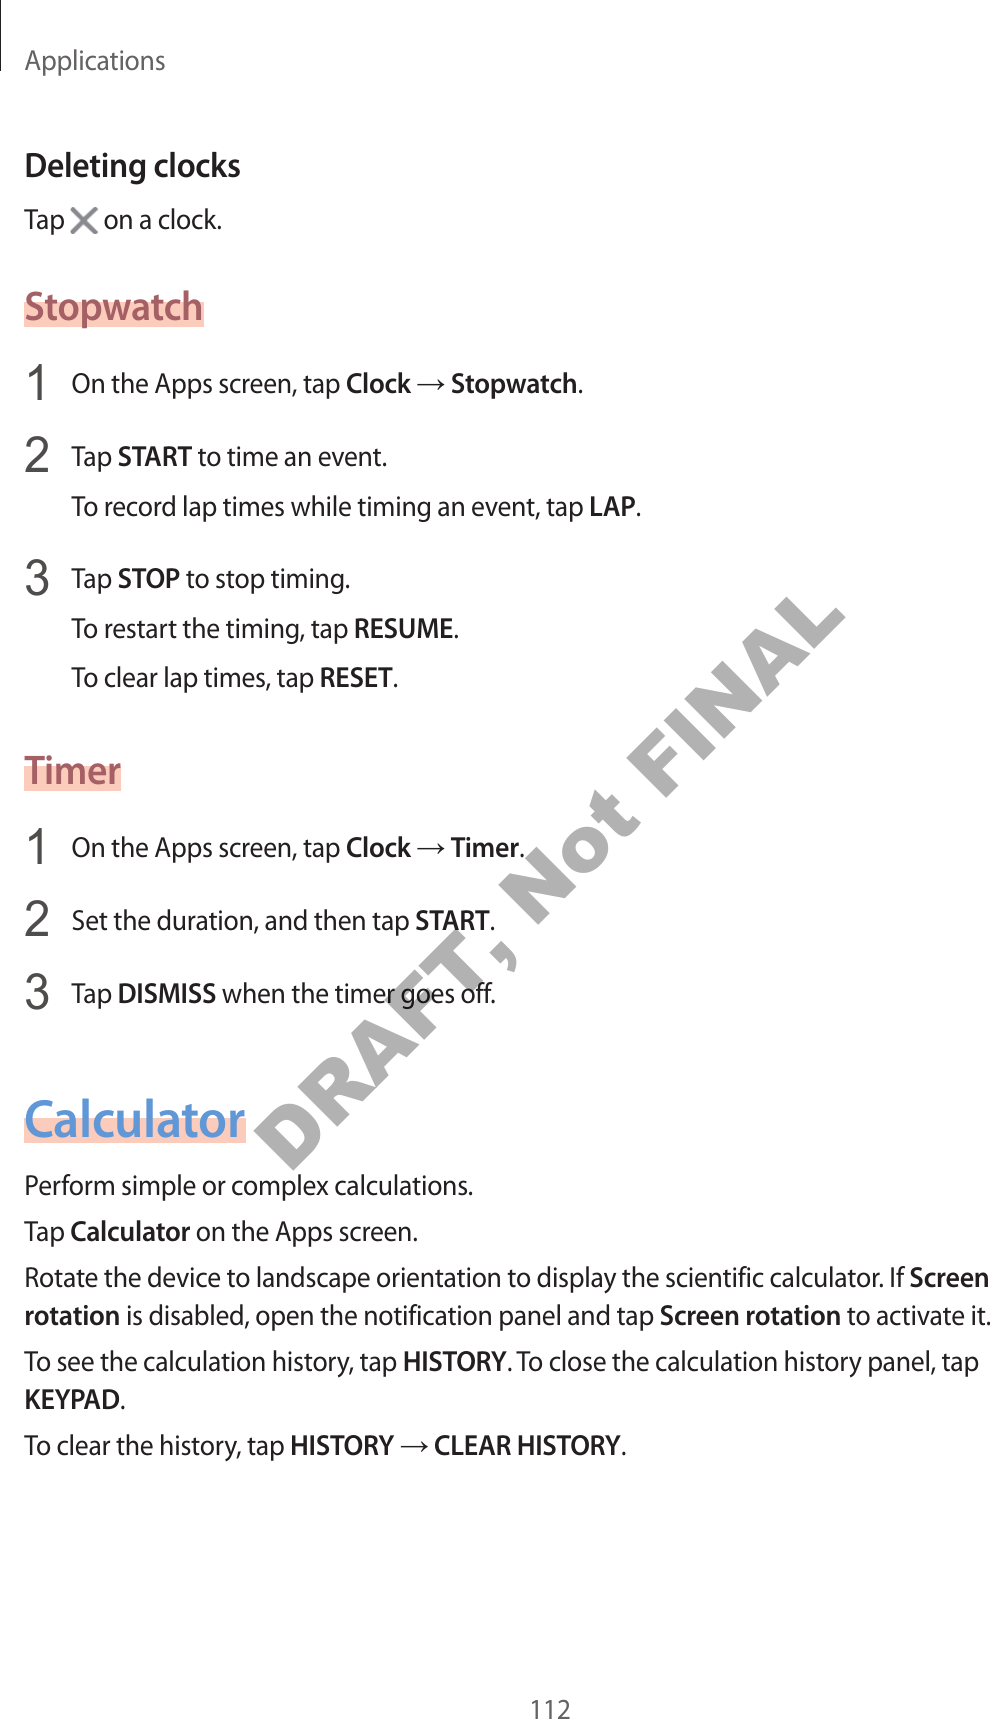 Applications112Deleting clocksTap   on a clock.Stopwatch1  On the Apps screen, tap Clock ĺ Stopwatch.2  Tap START to time an event.To record lap times while timing an event, tap LAP.3  Tap STOP to stop timing.To restart the timing, tap RESUME.To clear lap times, tap RESET.Timer1  On the Apps screen, tap Clock ĺ Timer.2  Set the duration, and then tap START.3  Tap DISMISS when the timer goes off.CalculatorPerform simple or complex calculations.Tap Calculator on the Apps screen.Rotate the device to landscape orientation to display the scientific calculator. If Screen rotation is disabled, open the notification panel and tap Screen rotation to activate it.To see the calculation history, tap HISTORY. To close the calculation history panel, tap KEYPAD.To clear the history, tap HISTORY ĺ CLEAR HISTORY.DRAFT, Not FINAL